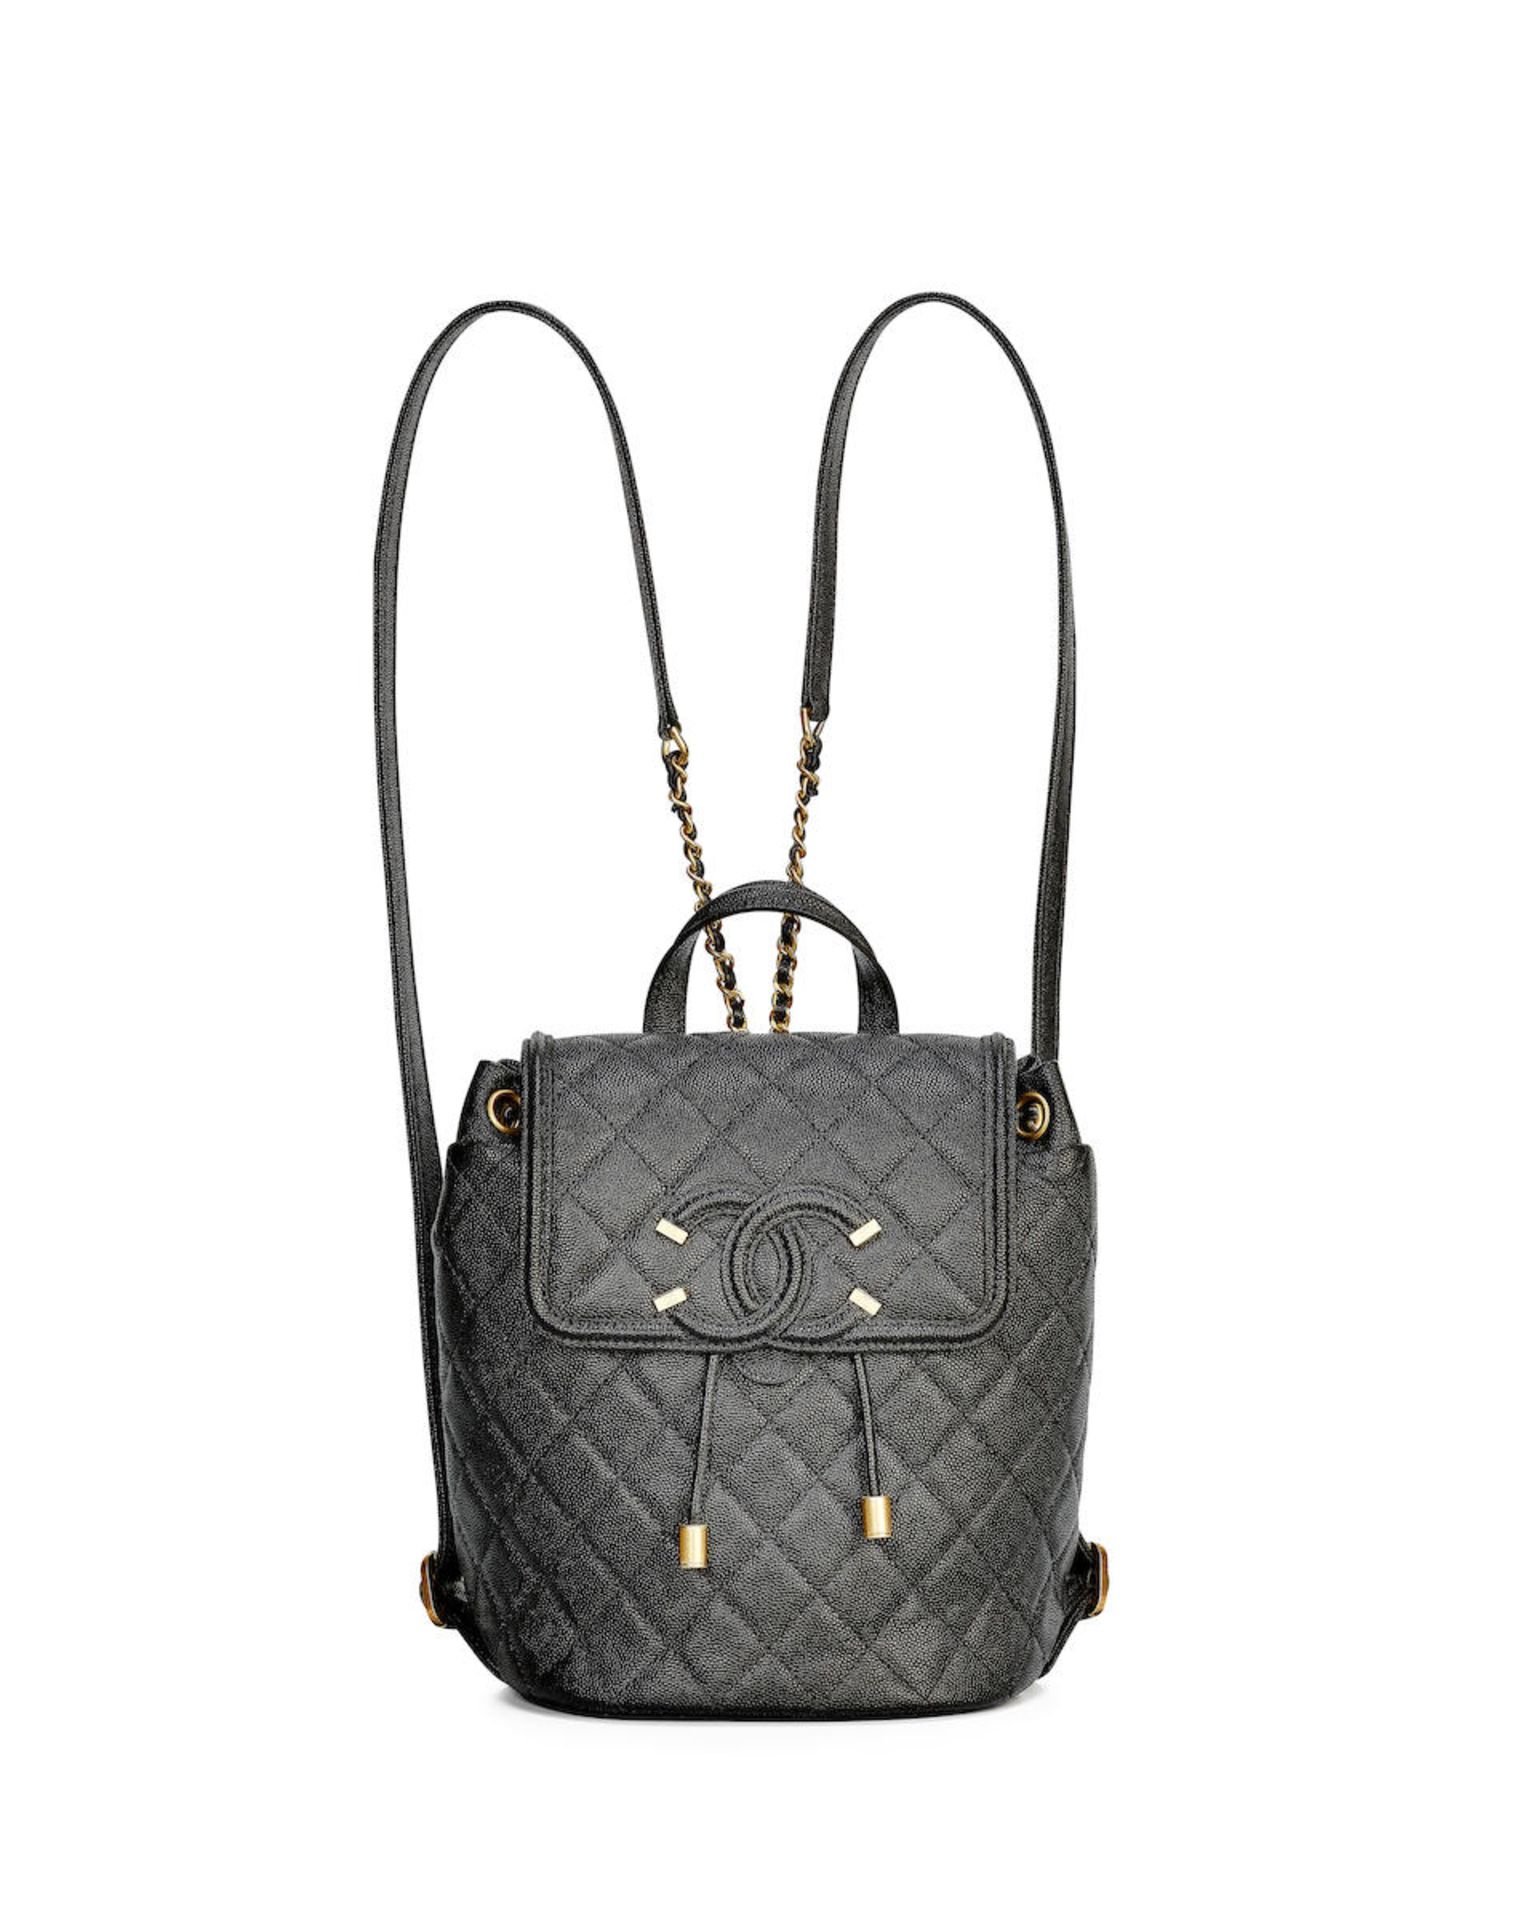 CHANEL: BLACK CAVIAR QUILTED FILIGREE BACKPACK WITH GOLD TONED HARDWARE (Includes original dust ...